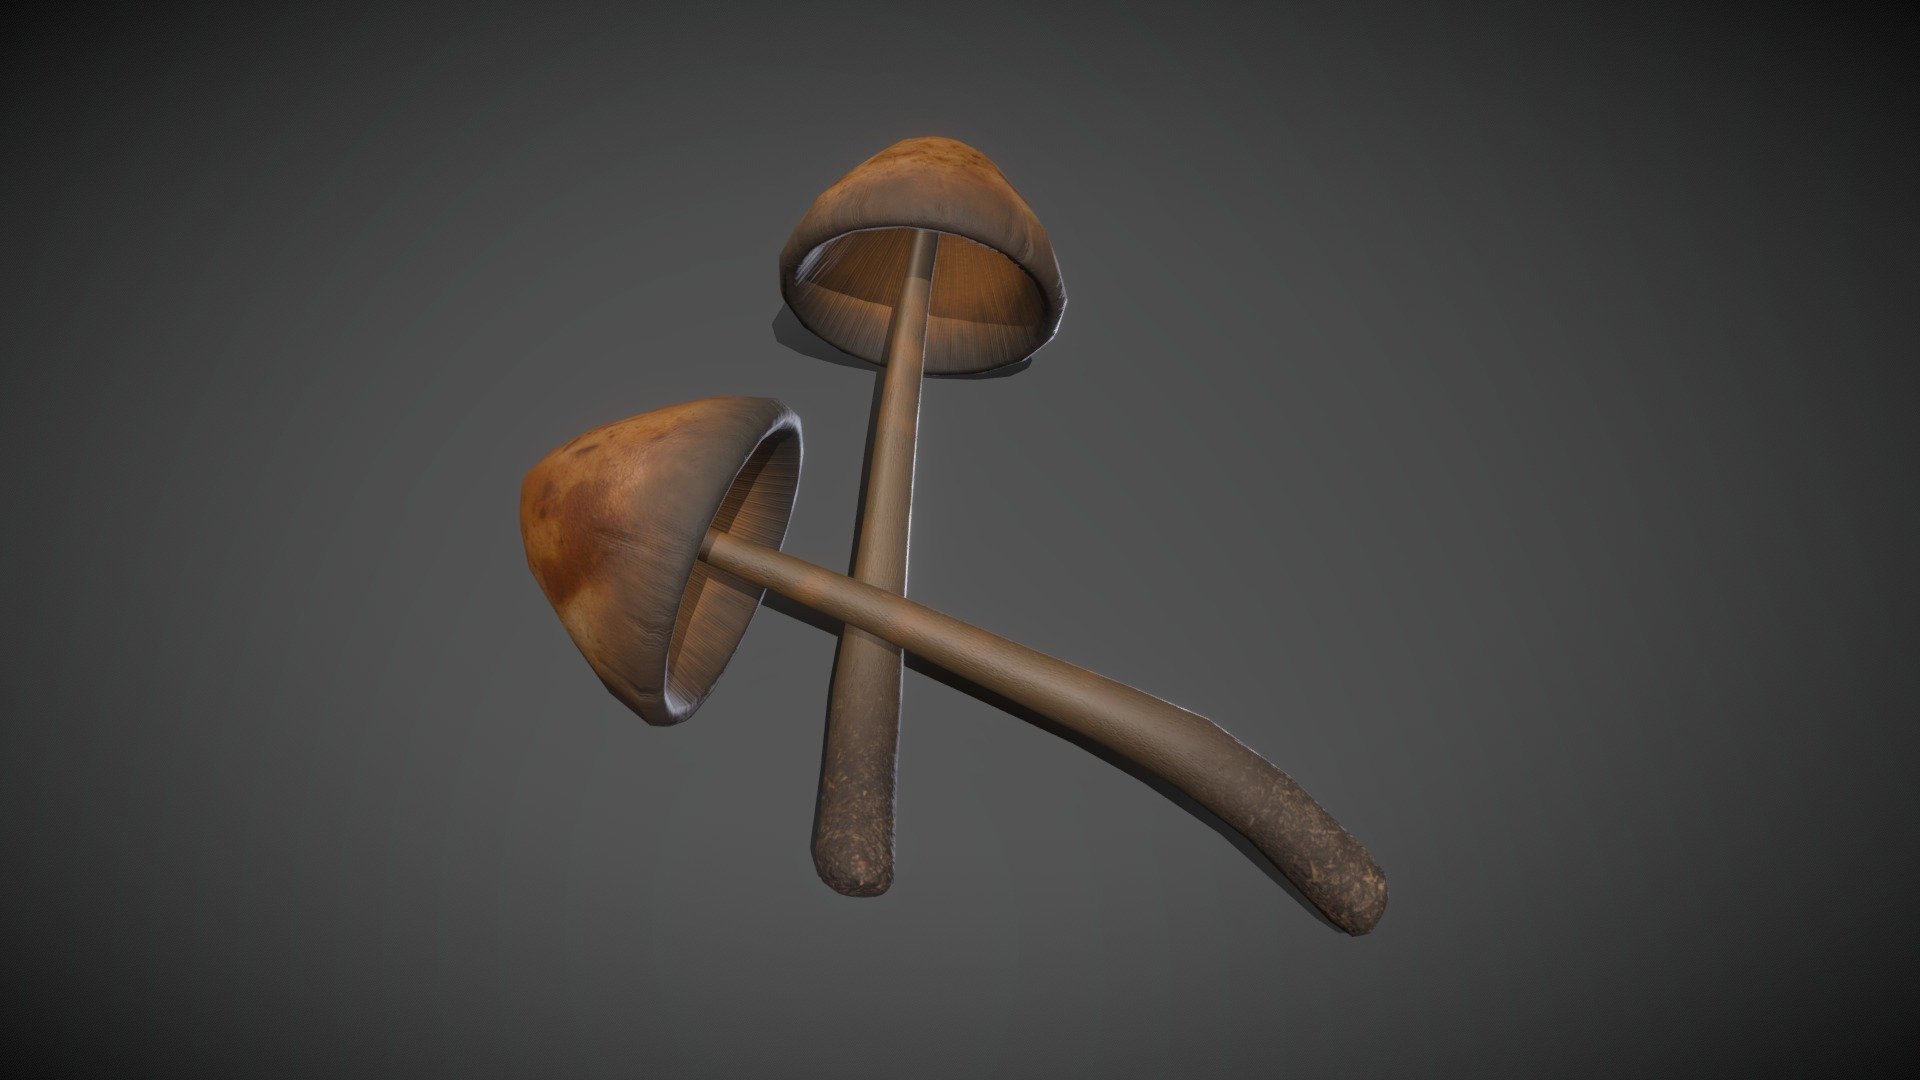 Some Mushrooms as little details in your alchemy room or just as ingredients for some delicious meal. 

Includes 2K and 1K texture sets (Albedo, Normal, Roughness, AO) 3d model